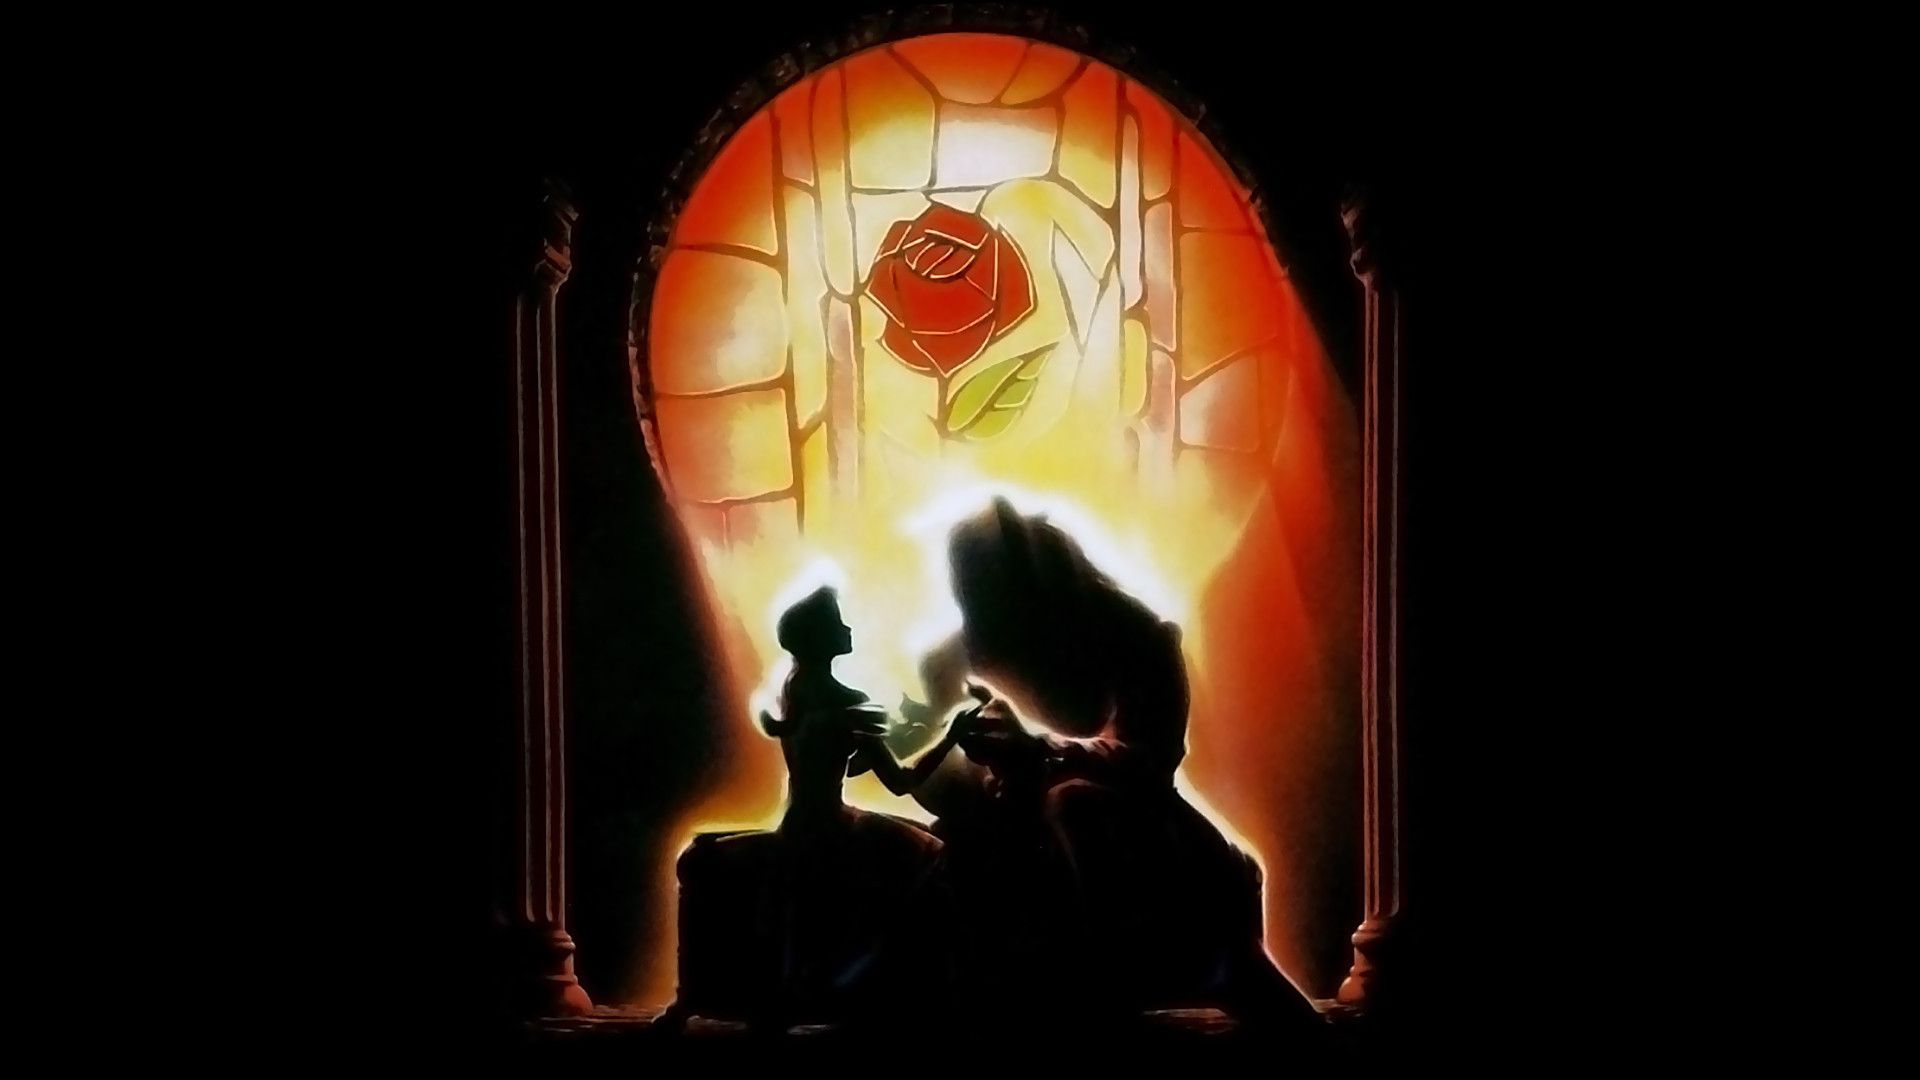 Beauty And The Beast (1920x1080). Beauty and the beast wallpaper, Beast wallpaper, Beauty and the beast